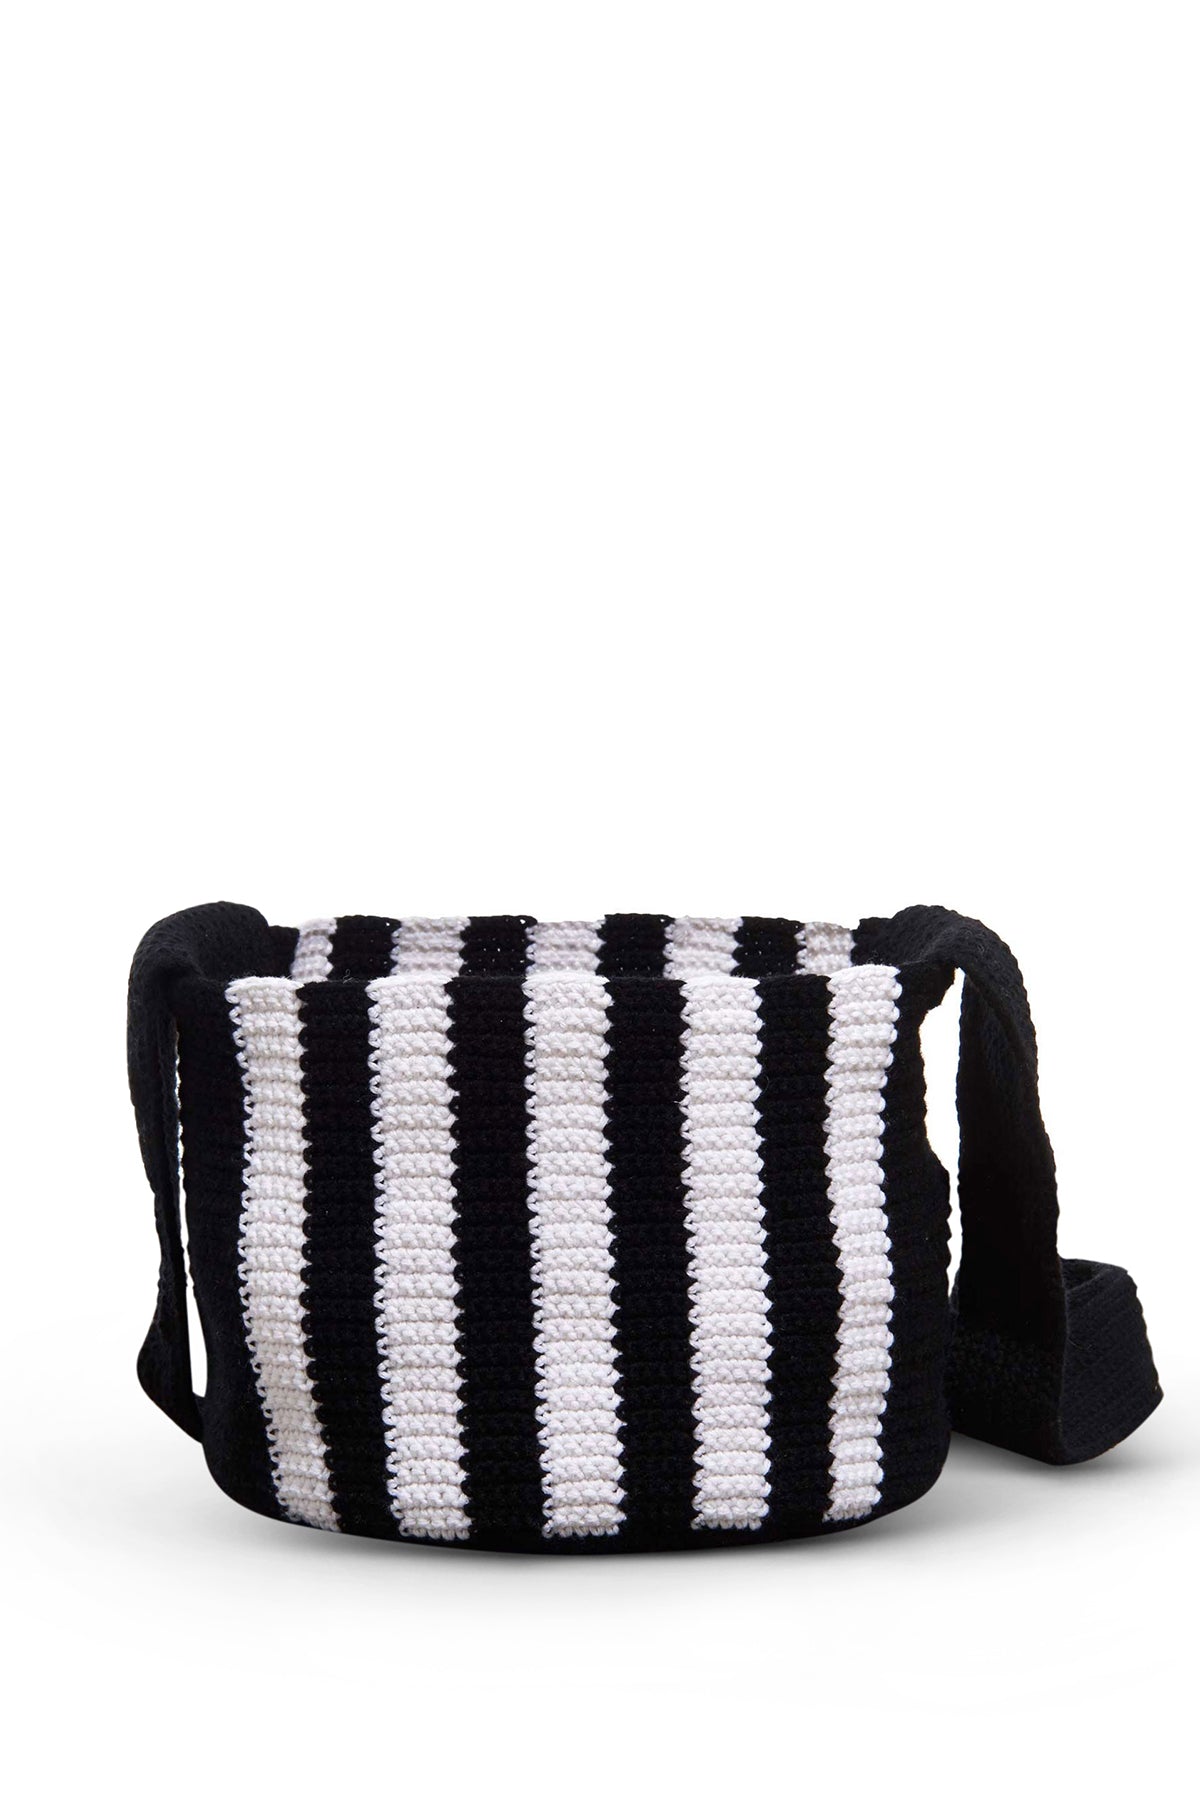 Crossover Knit Bag in Black & Ivory Cashmere